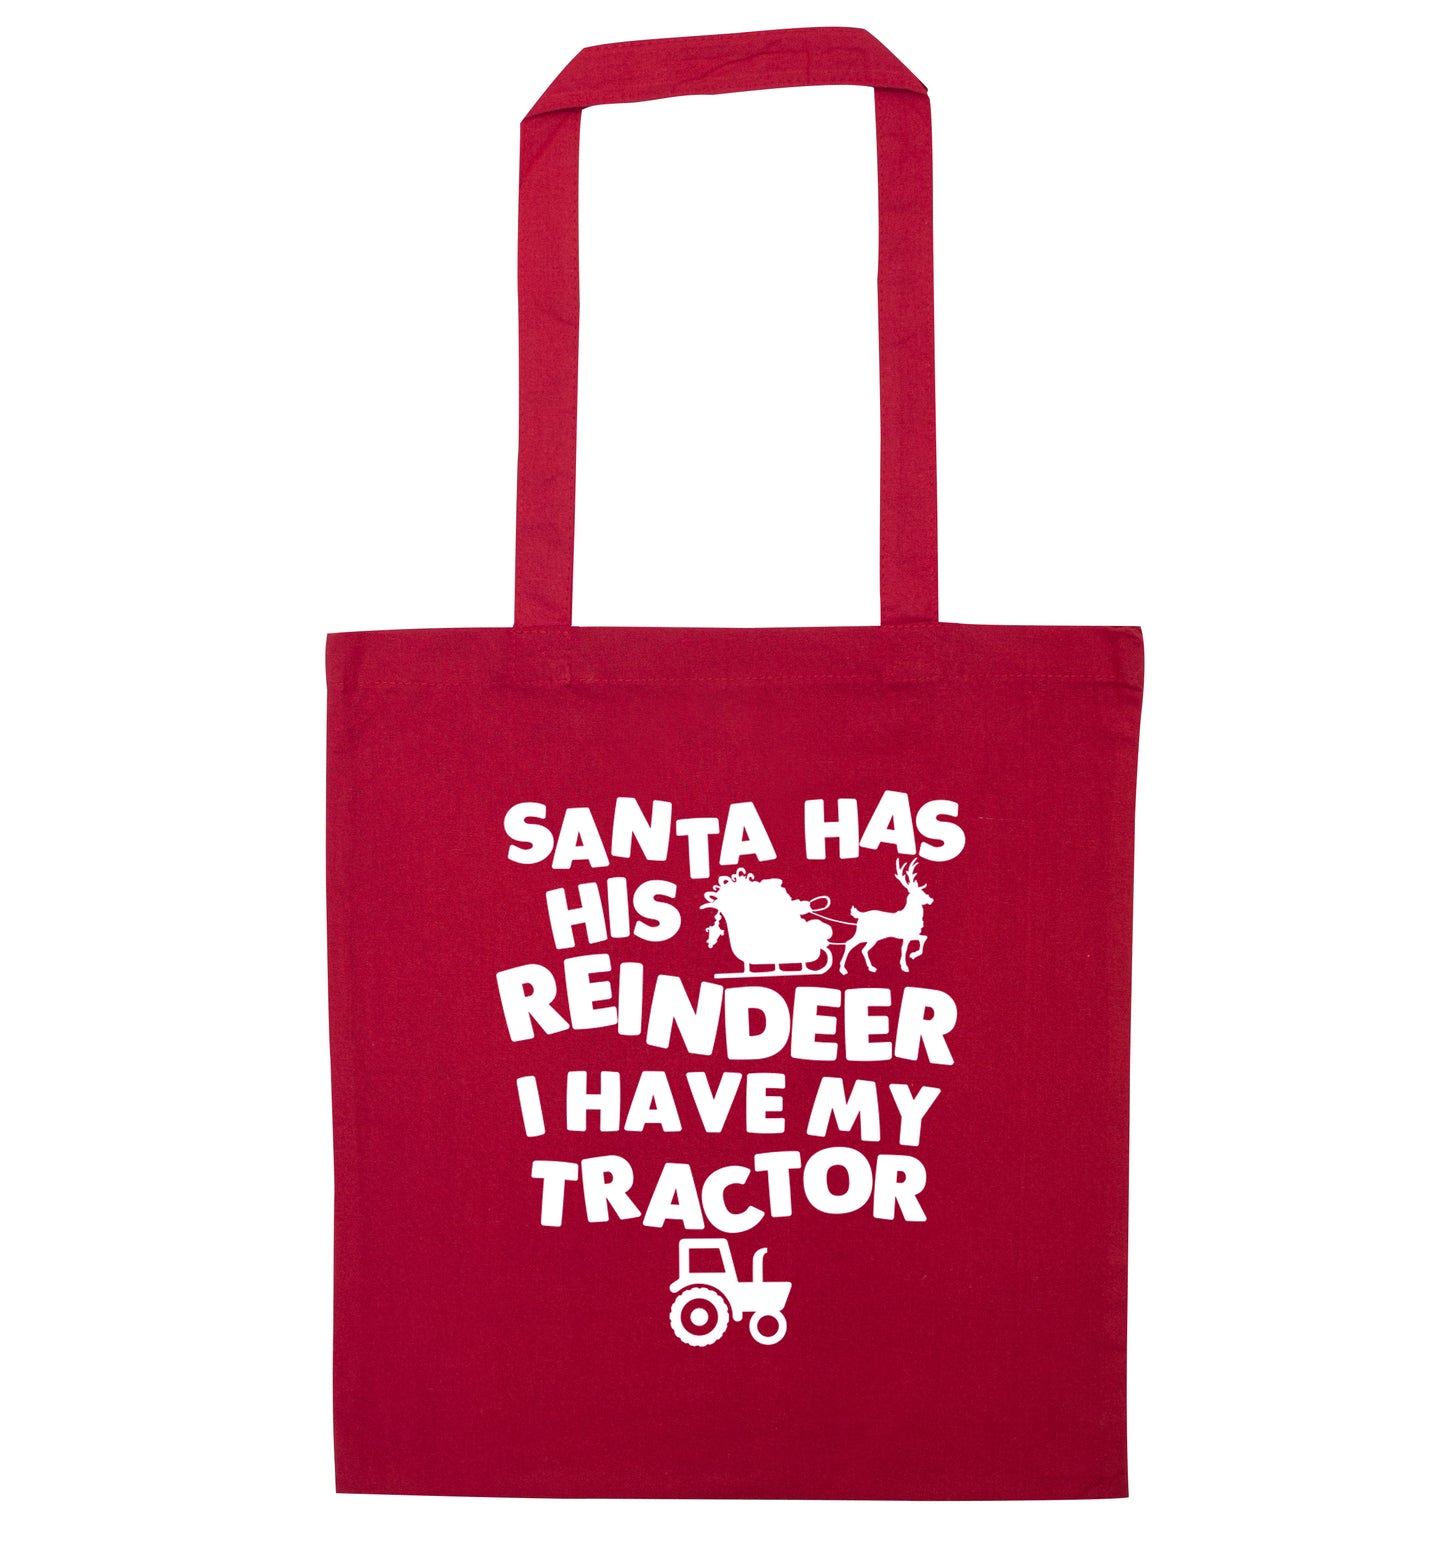 Santa has his reindeer I have my tractor red tote bag